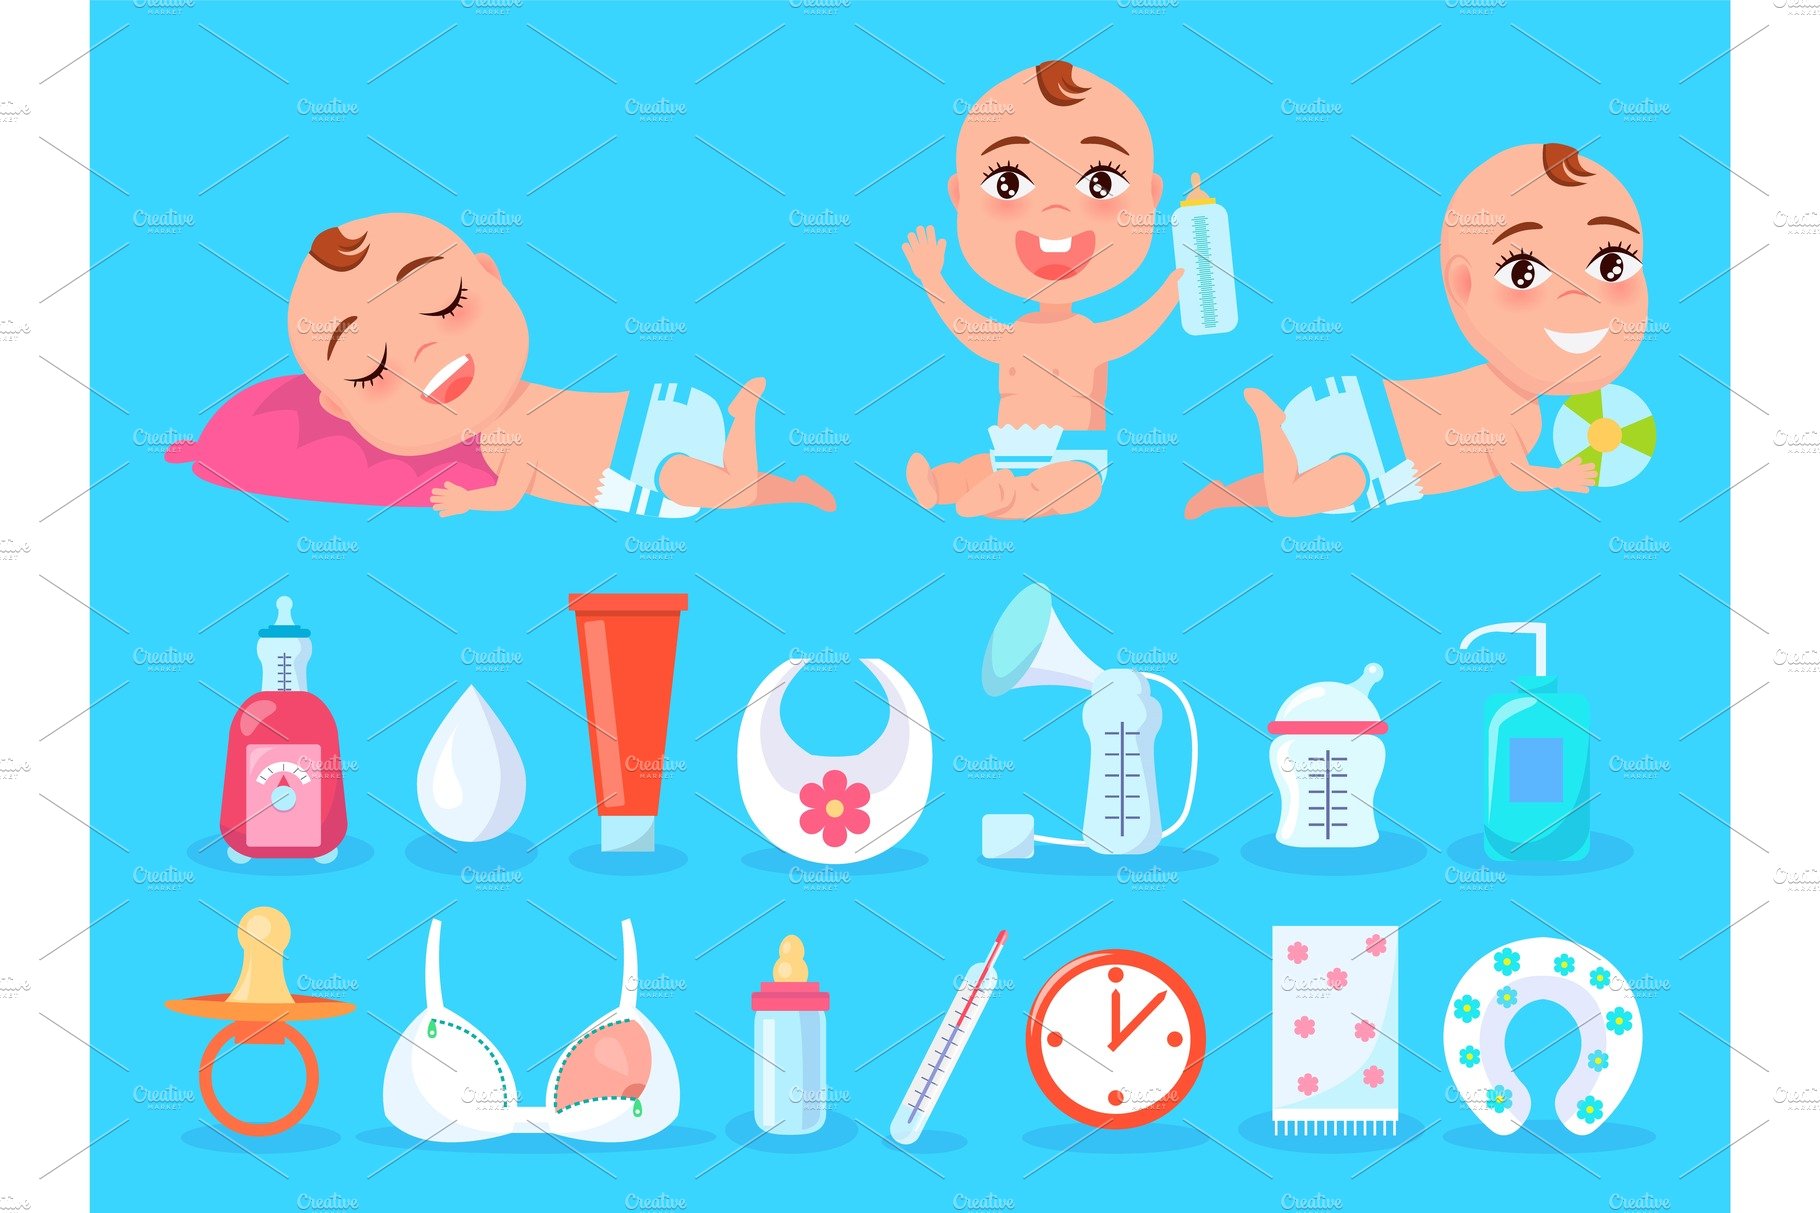 Baby and Objects for Kid Care Vector Illustration cover image.